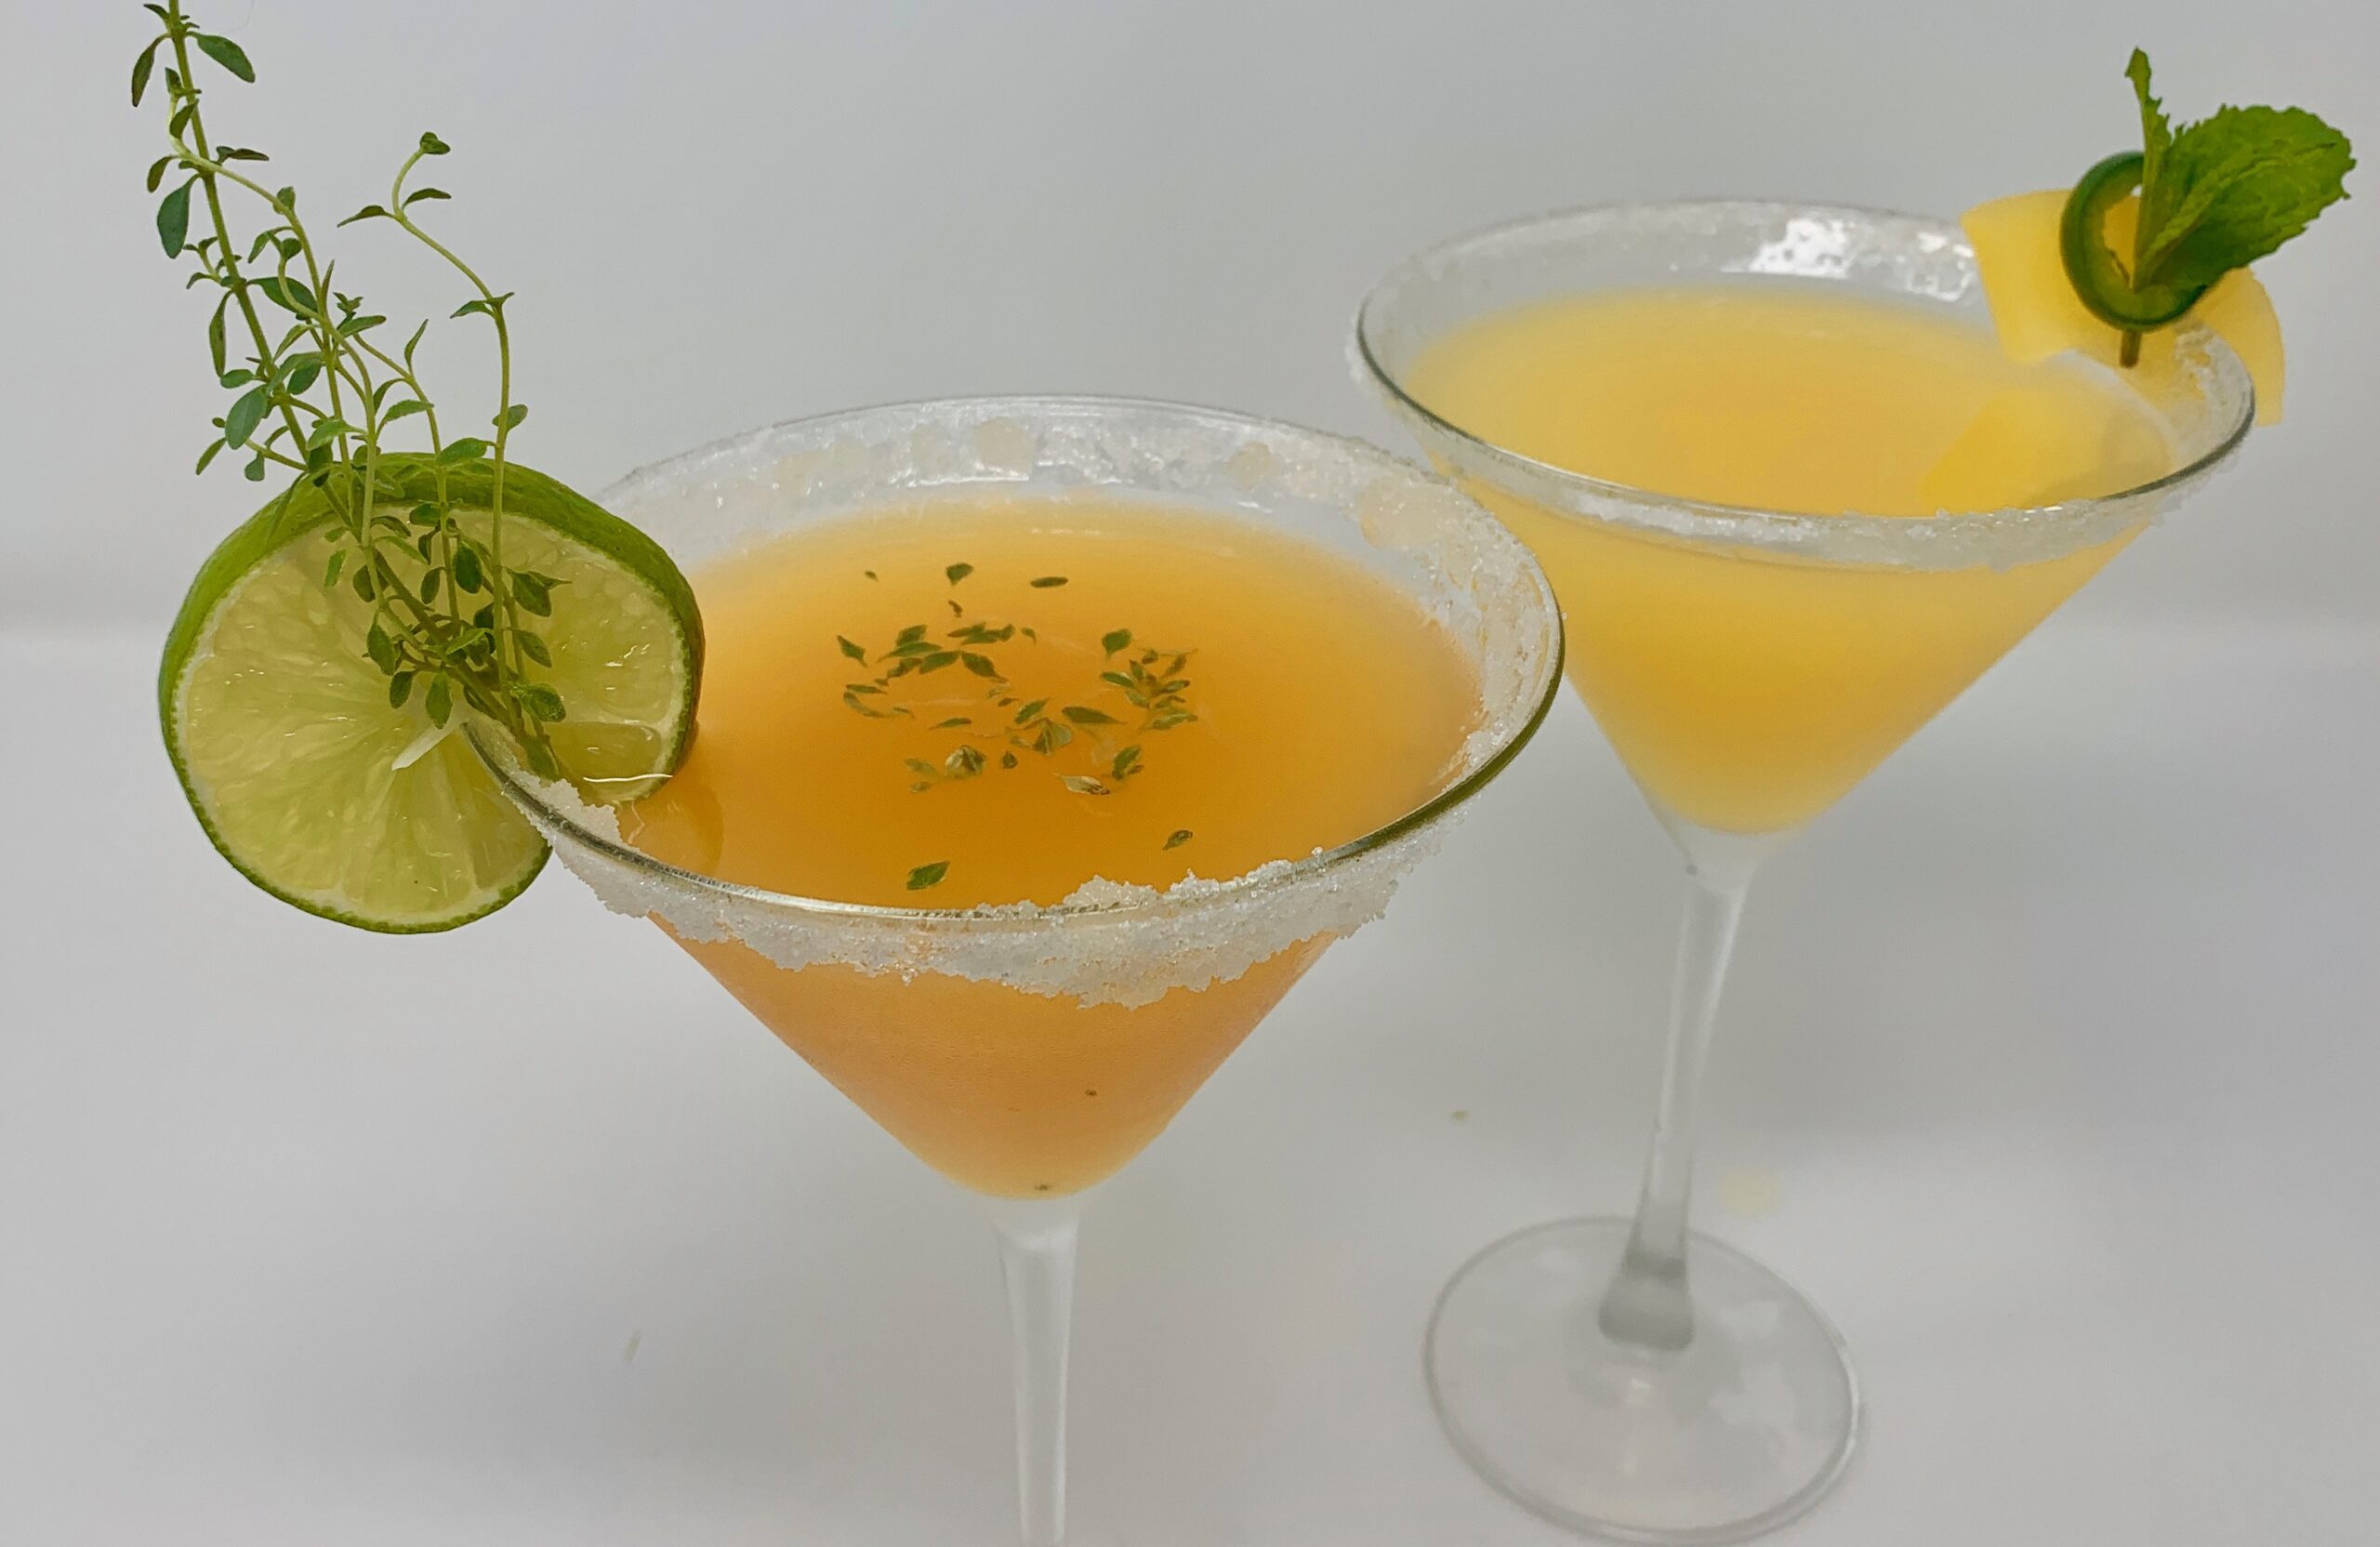 Pineapple & Peach Ginger Tinis